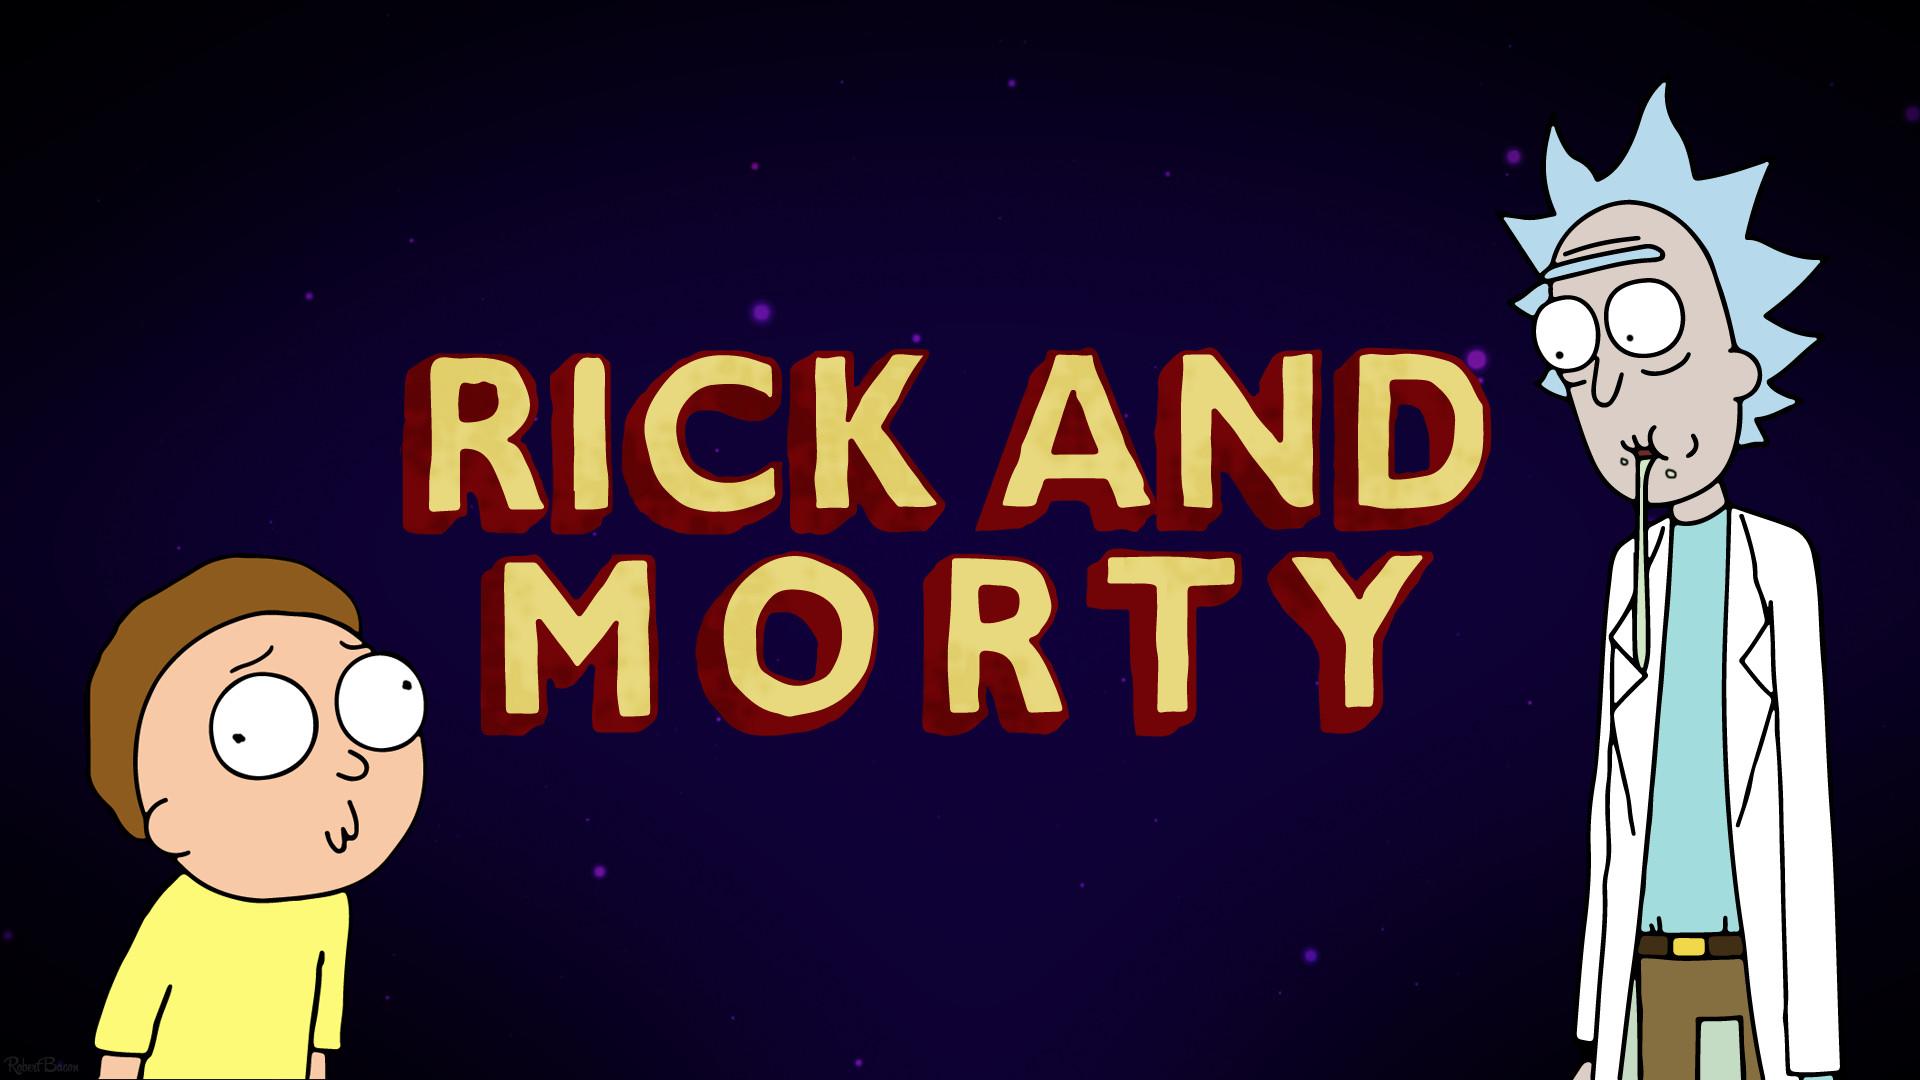 Rick and Morty Wallpaper 1920X1080 background picture